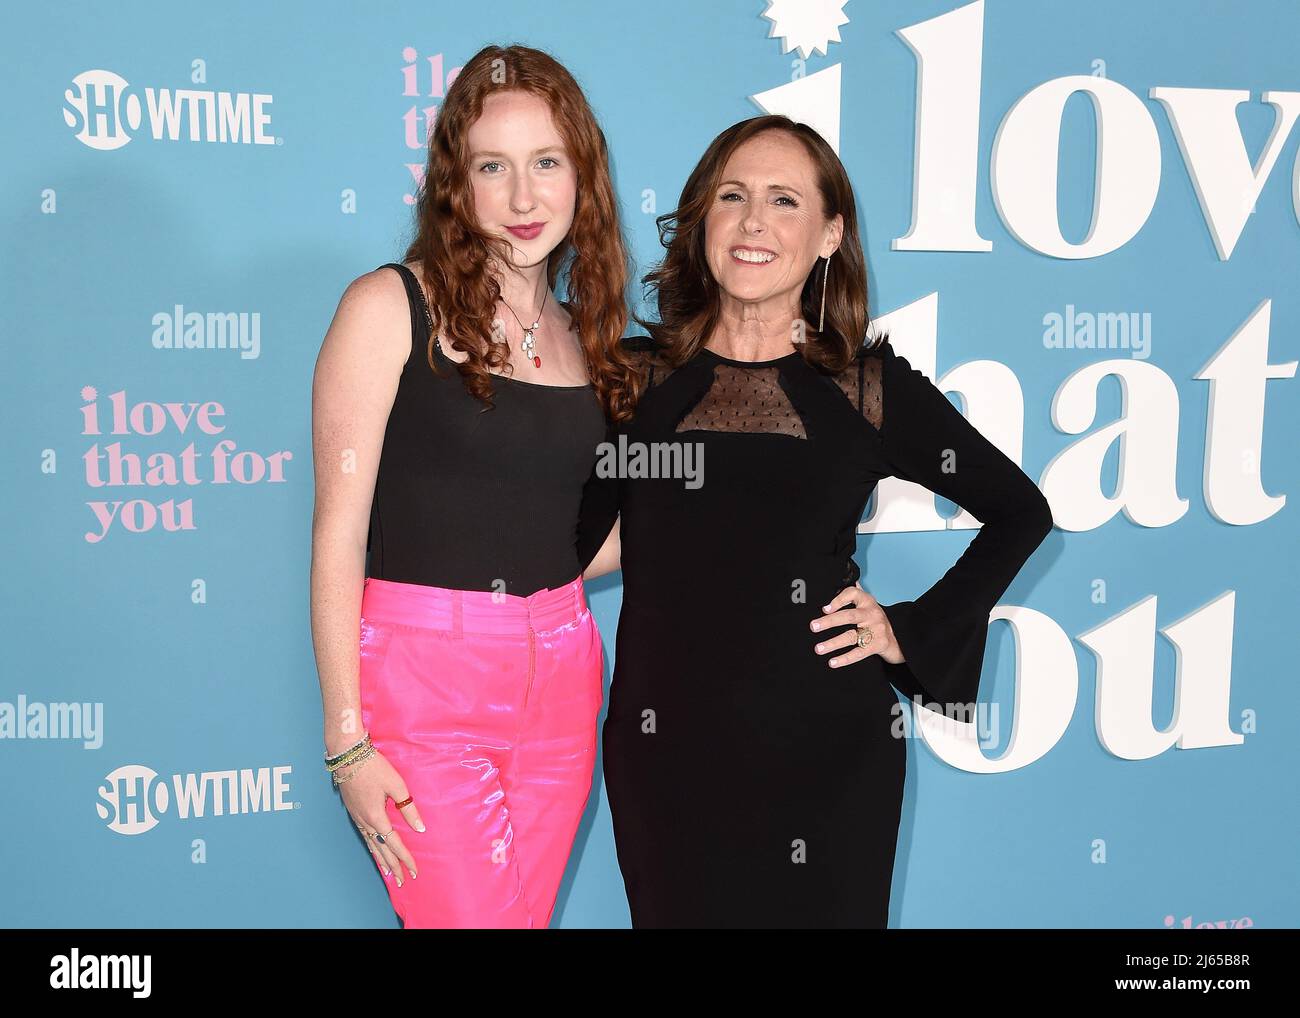 Los Angeles, USA. 27th Apr, 2022. Stella Shannon Chesnut and Molly Shannon walking on the red carpet at the premiere of Showtime's 'I Love That For You' at Pacific Design Center in Los Angeles, CA on April 27, 2022. (Photo By Scott Kirkland/Sipa USA) Credit: Sipa USA/Alamy Live News Stock Photo